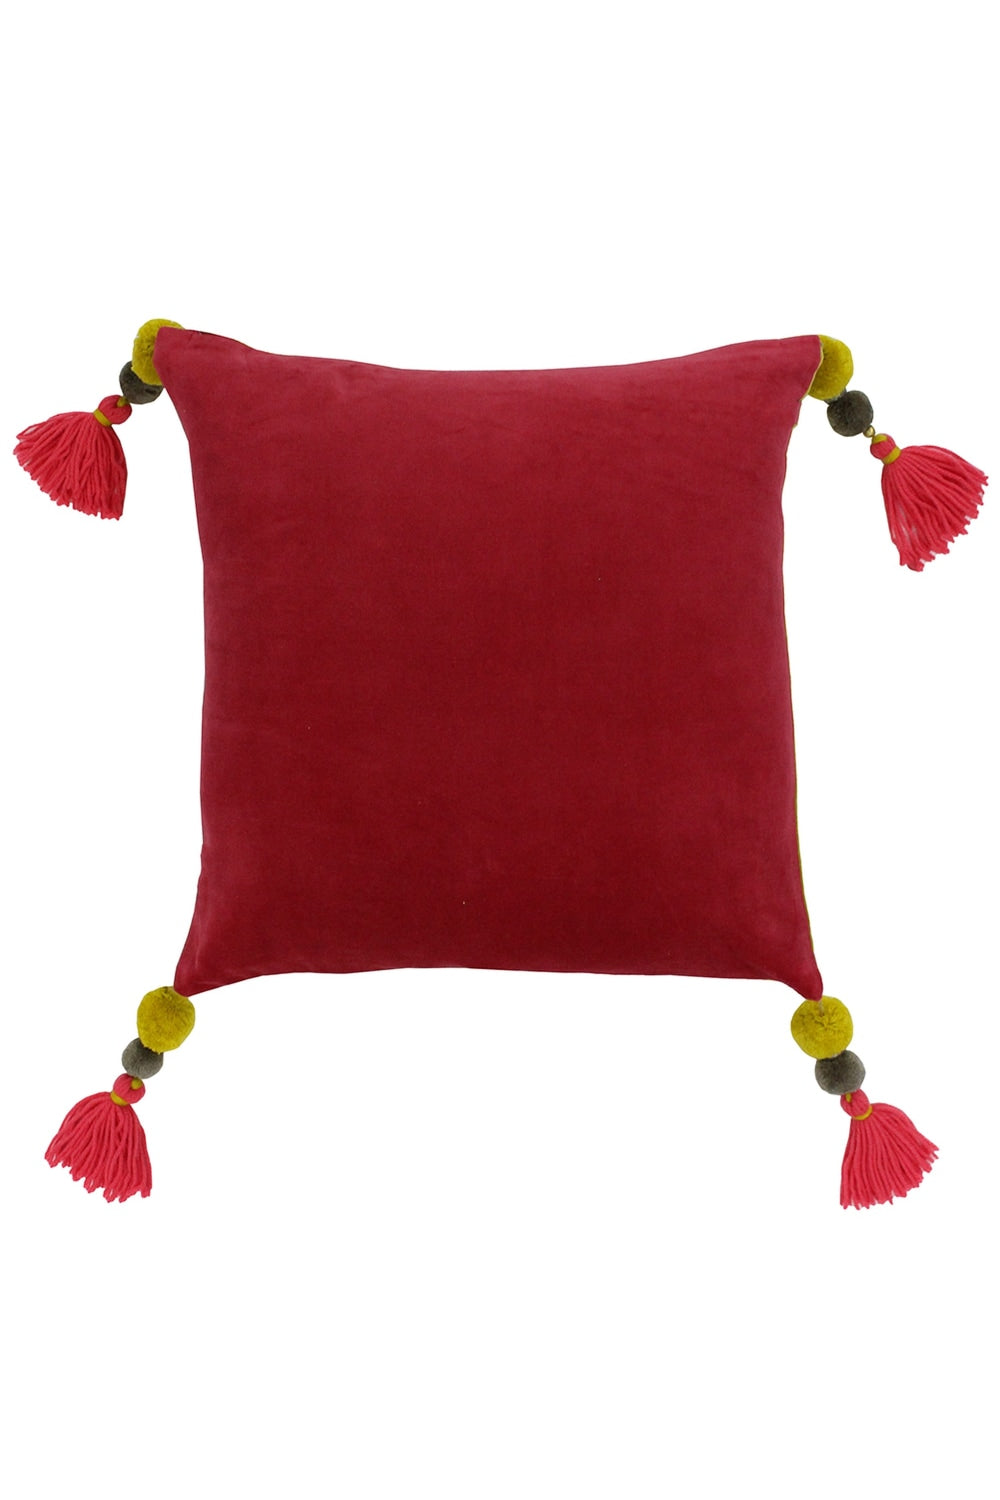 Rive Home Poonam Cushion Cover (Pomegranate/Lemon Curry) (17.7 x 17.7in)